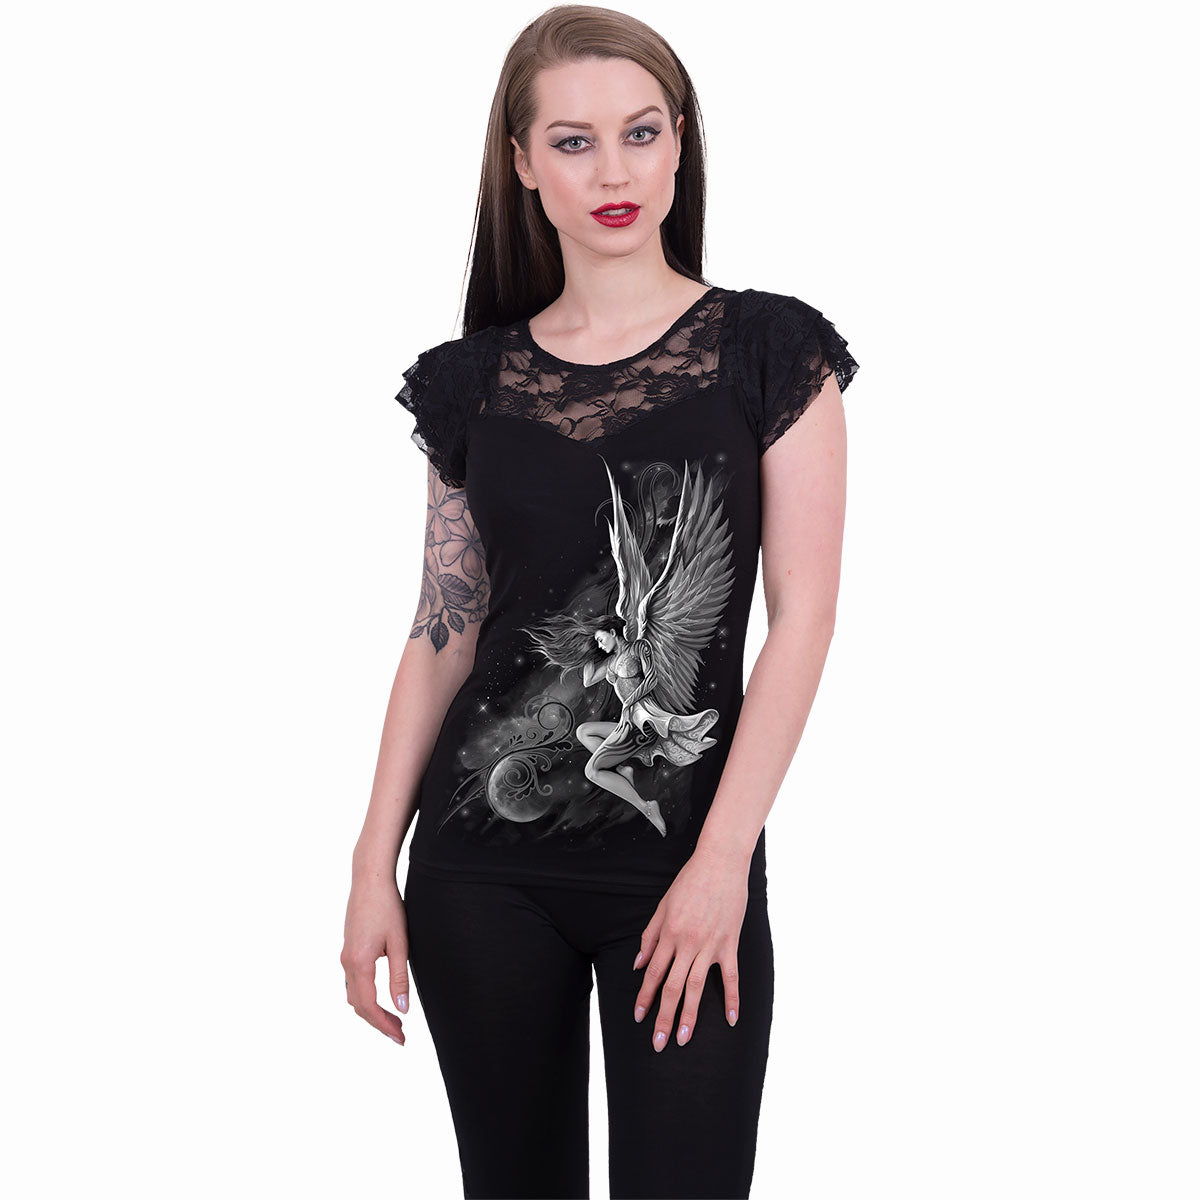 LUCID DREAMS - Lace Layered Cap Sleeve Top Black